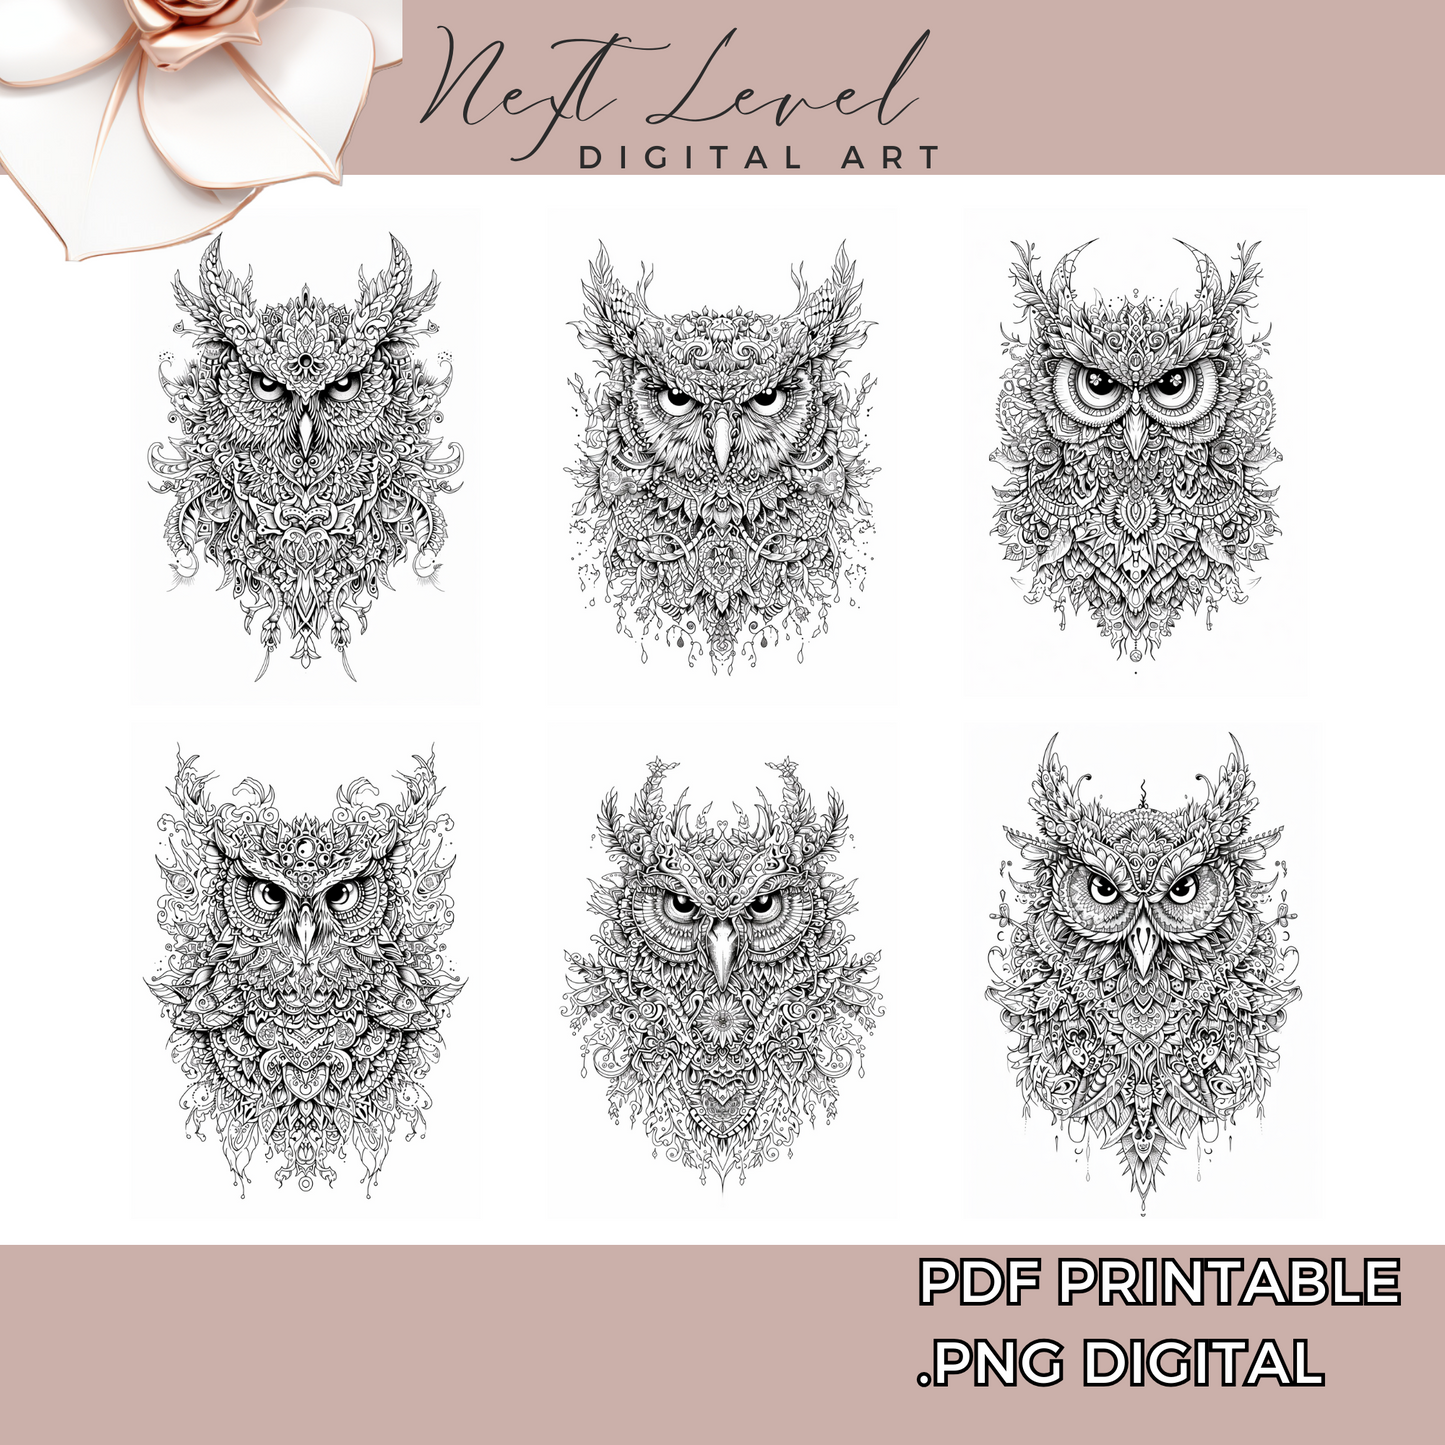 Adult Coloring Pages Printable Grayscale Owl Coloring Pages Detailed Coloring Available in PDF | PNG For Procreate Digital - Adults & Teens